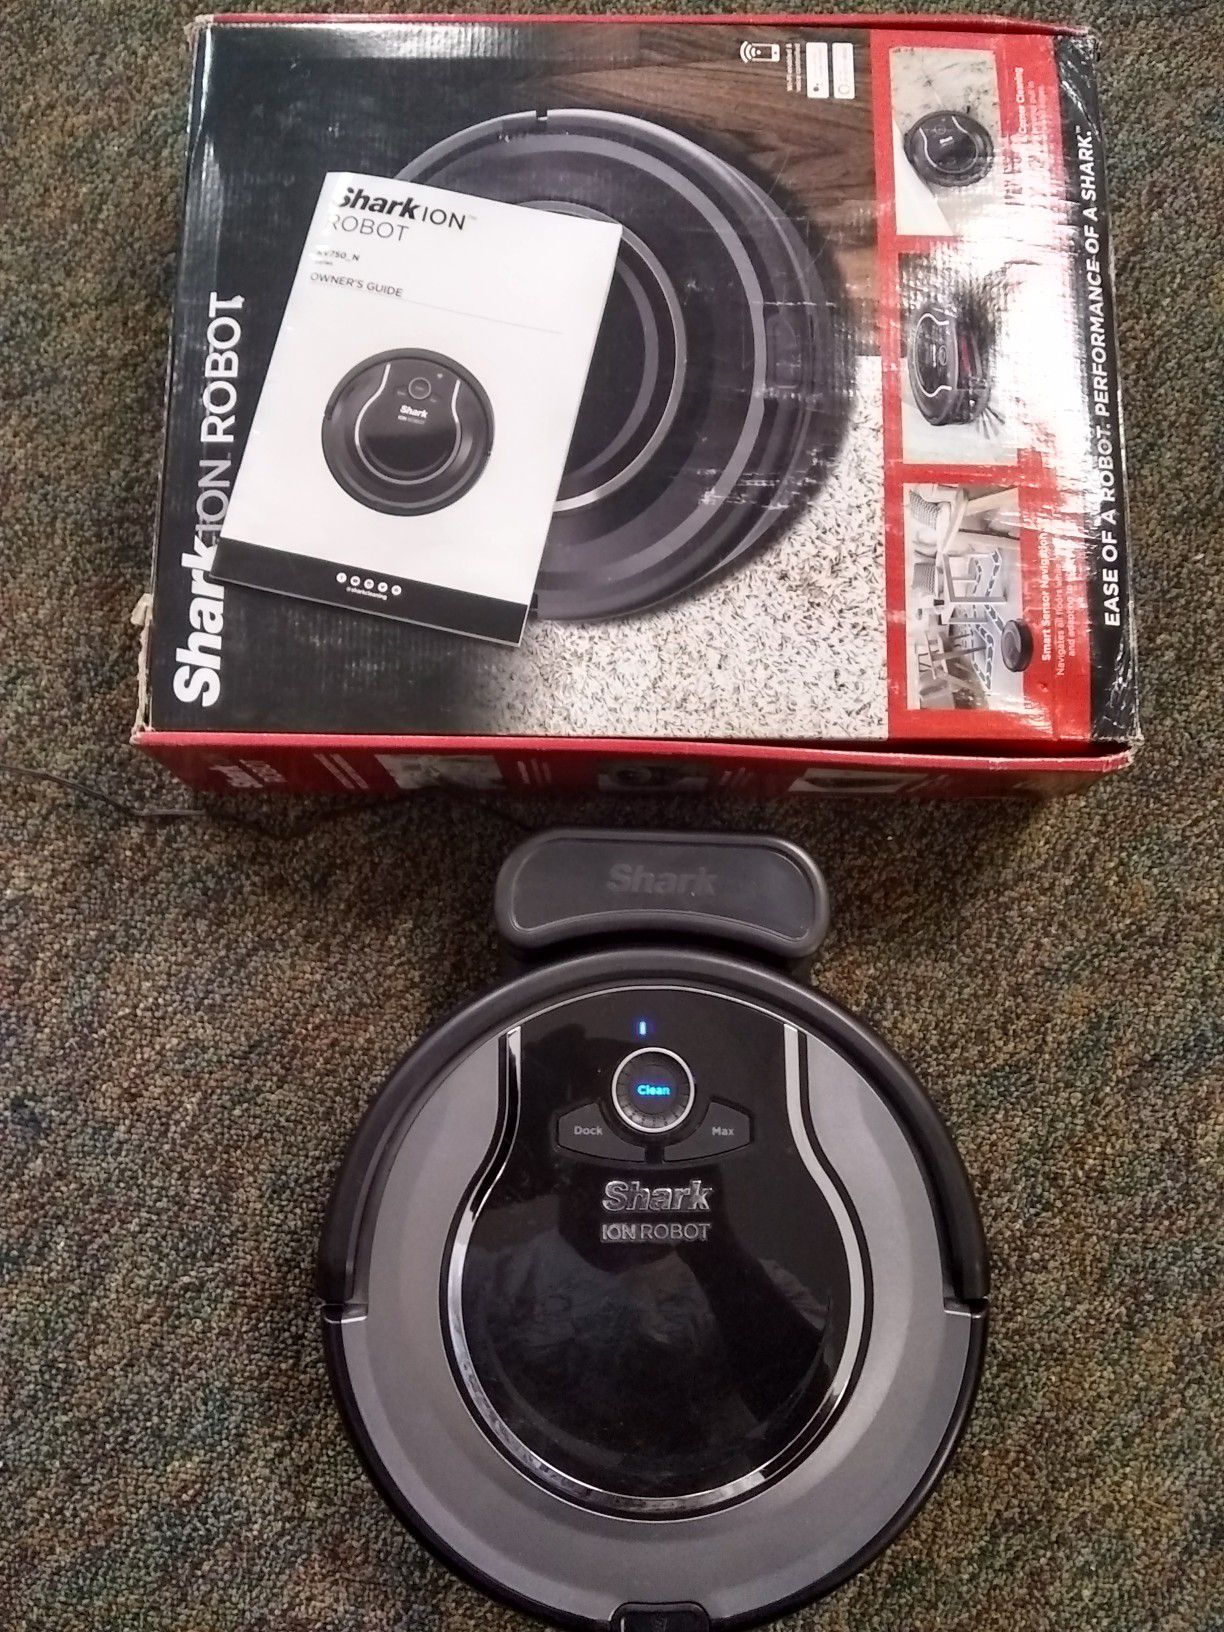 Shark ION ROBOT 750 Connected Robotic Vacuum Cleaner (Used)